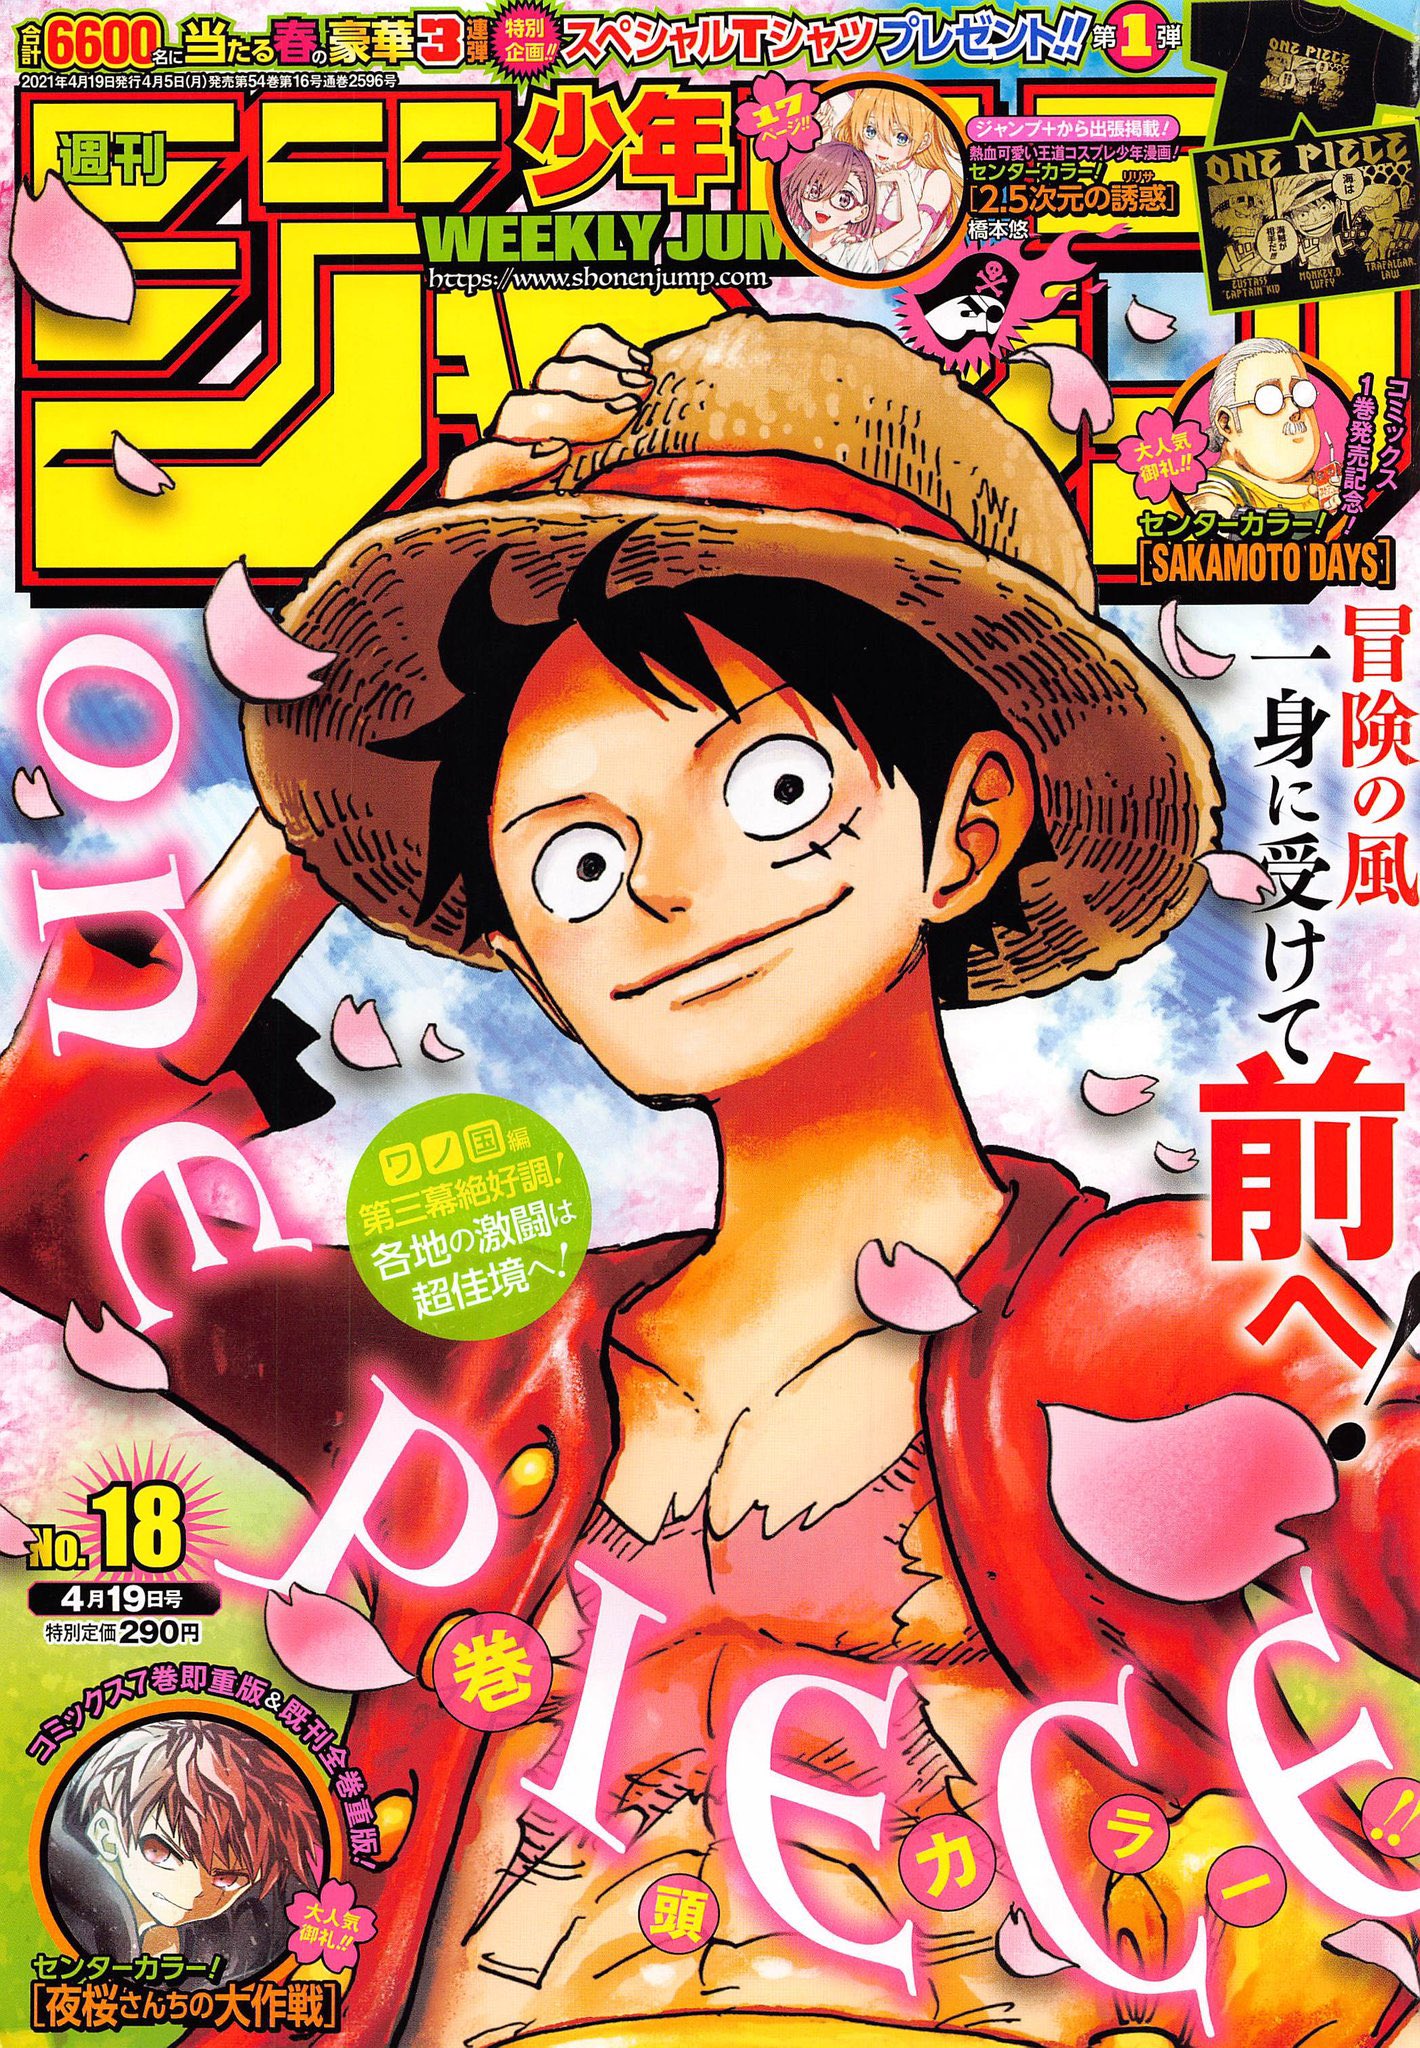 Orojapan Onepiece Official The One Piece Manga Series Volumes Have Sold Over 490 Million Copies In The World In Japan More Than 400 Million Copies Outside Japan 57 Other Countries